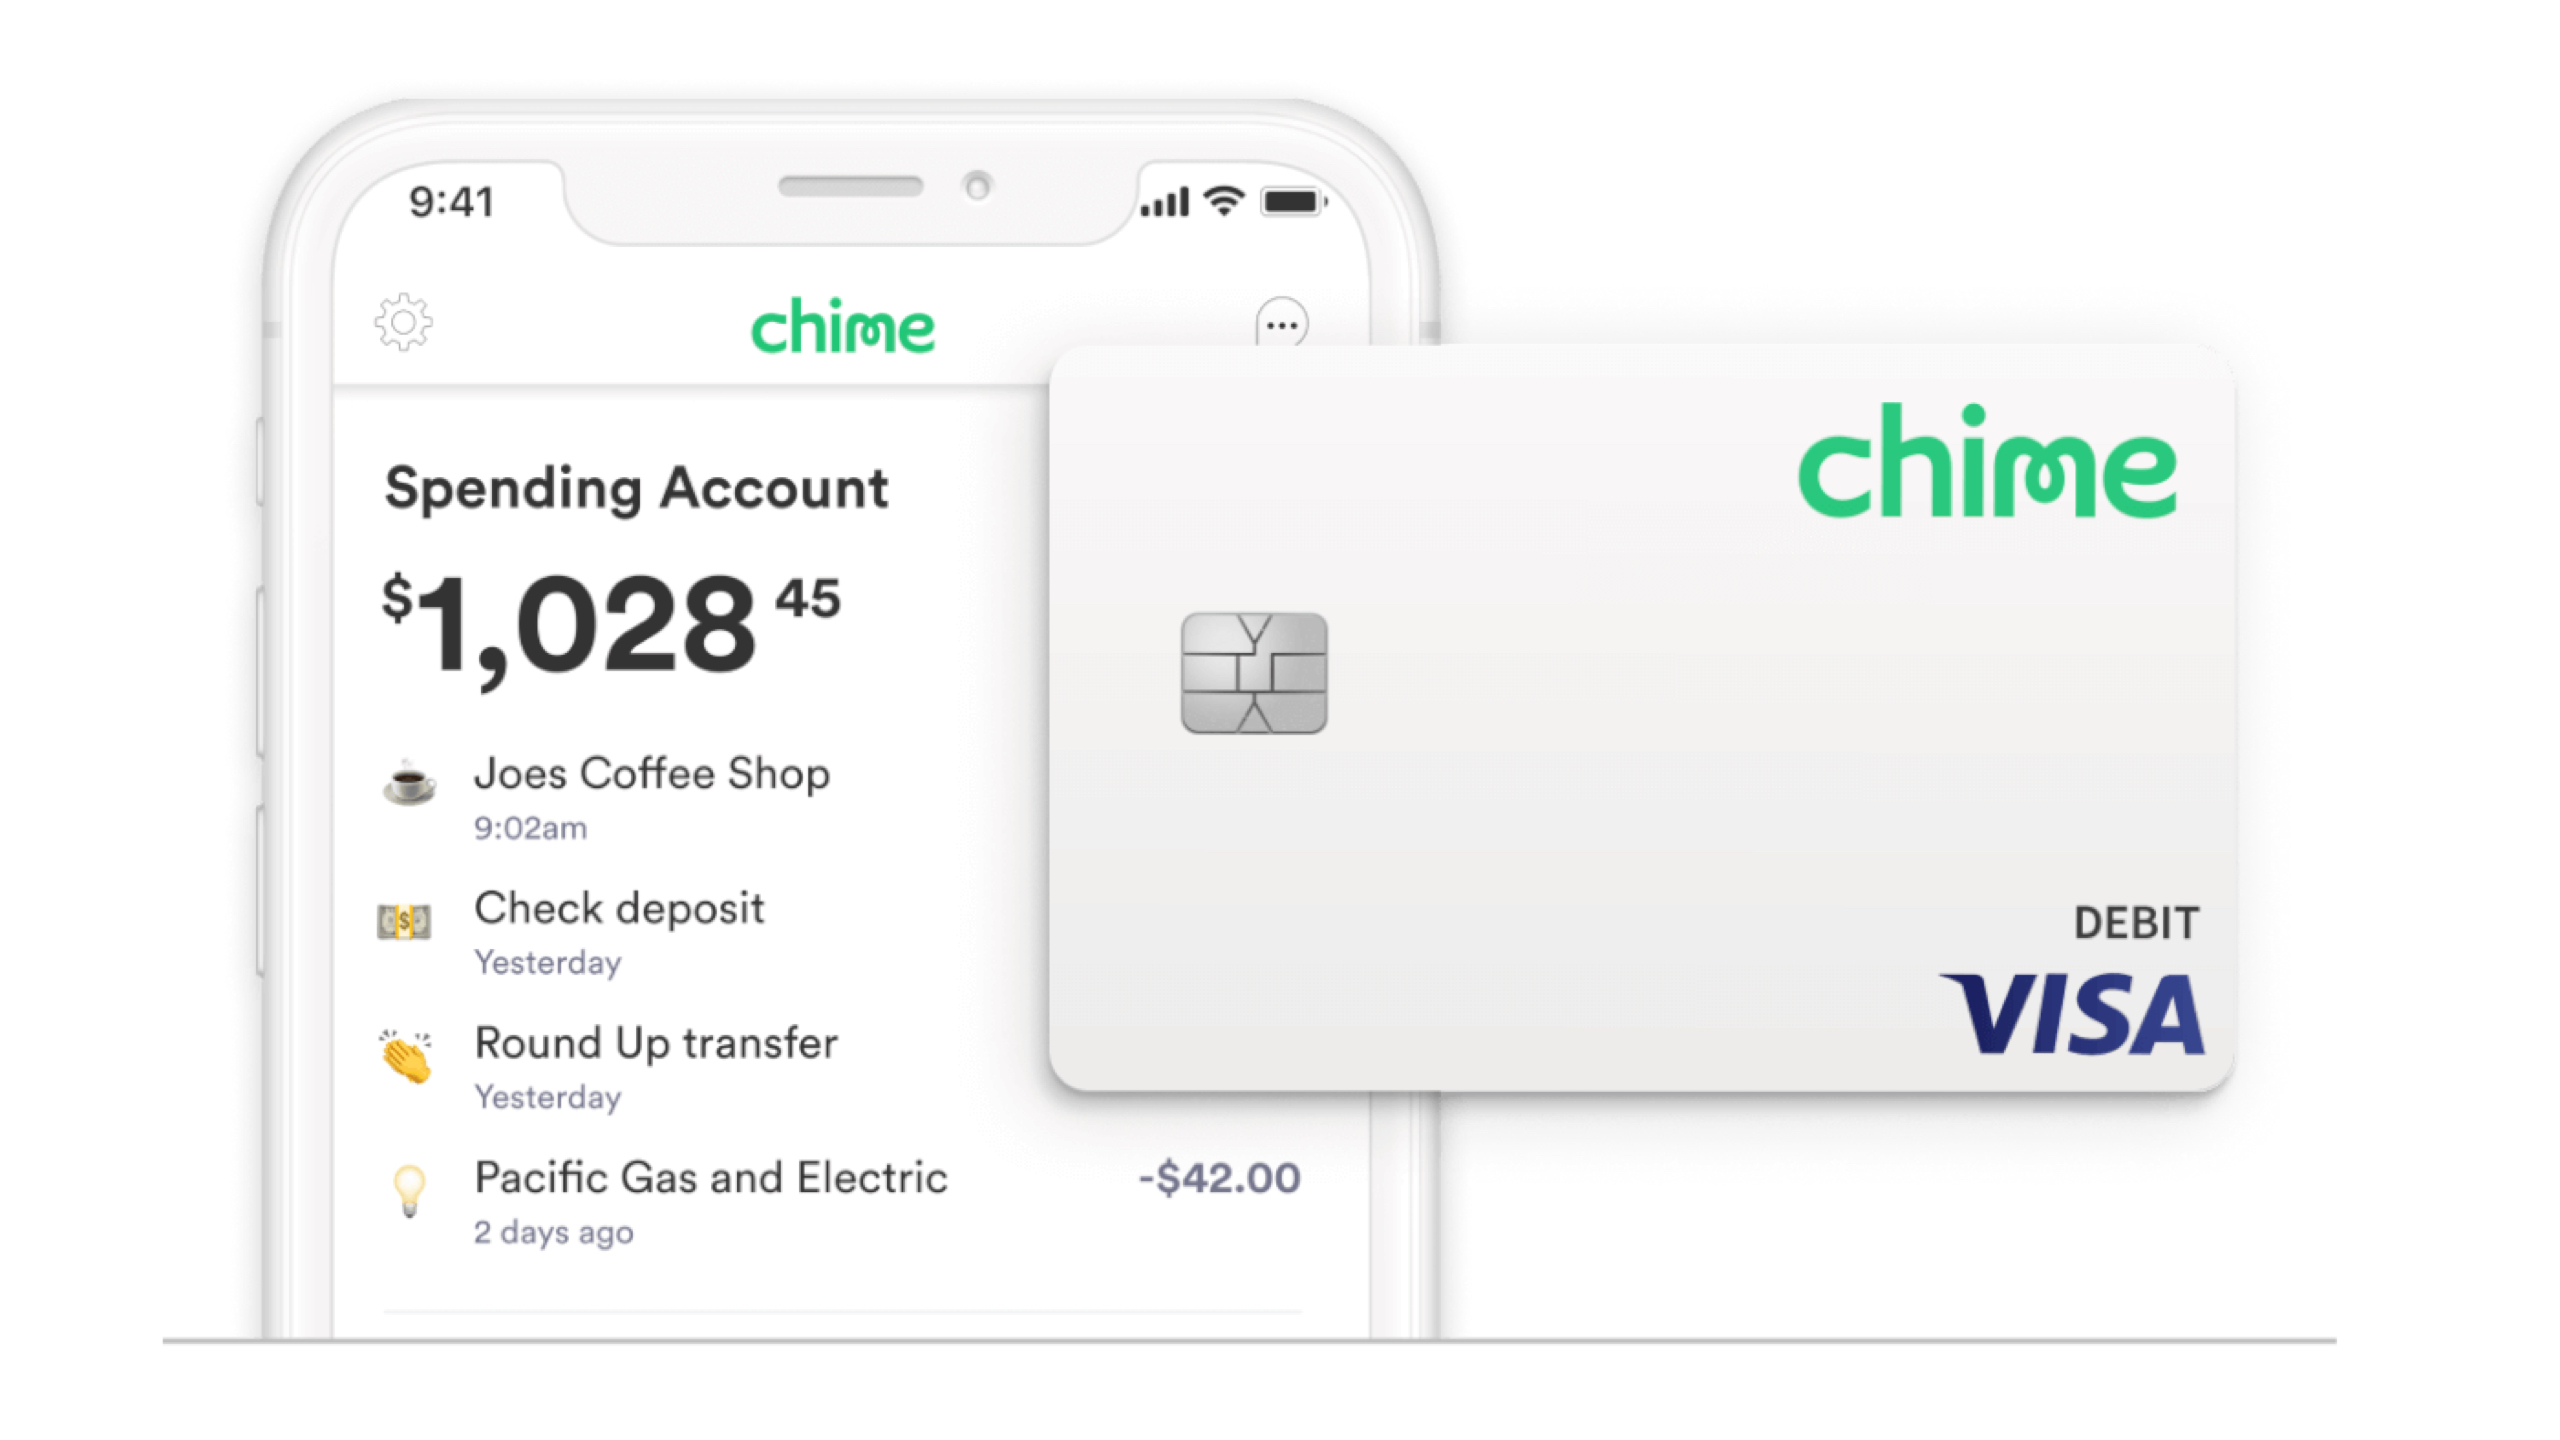 Chime phone app and card